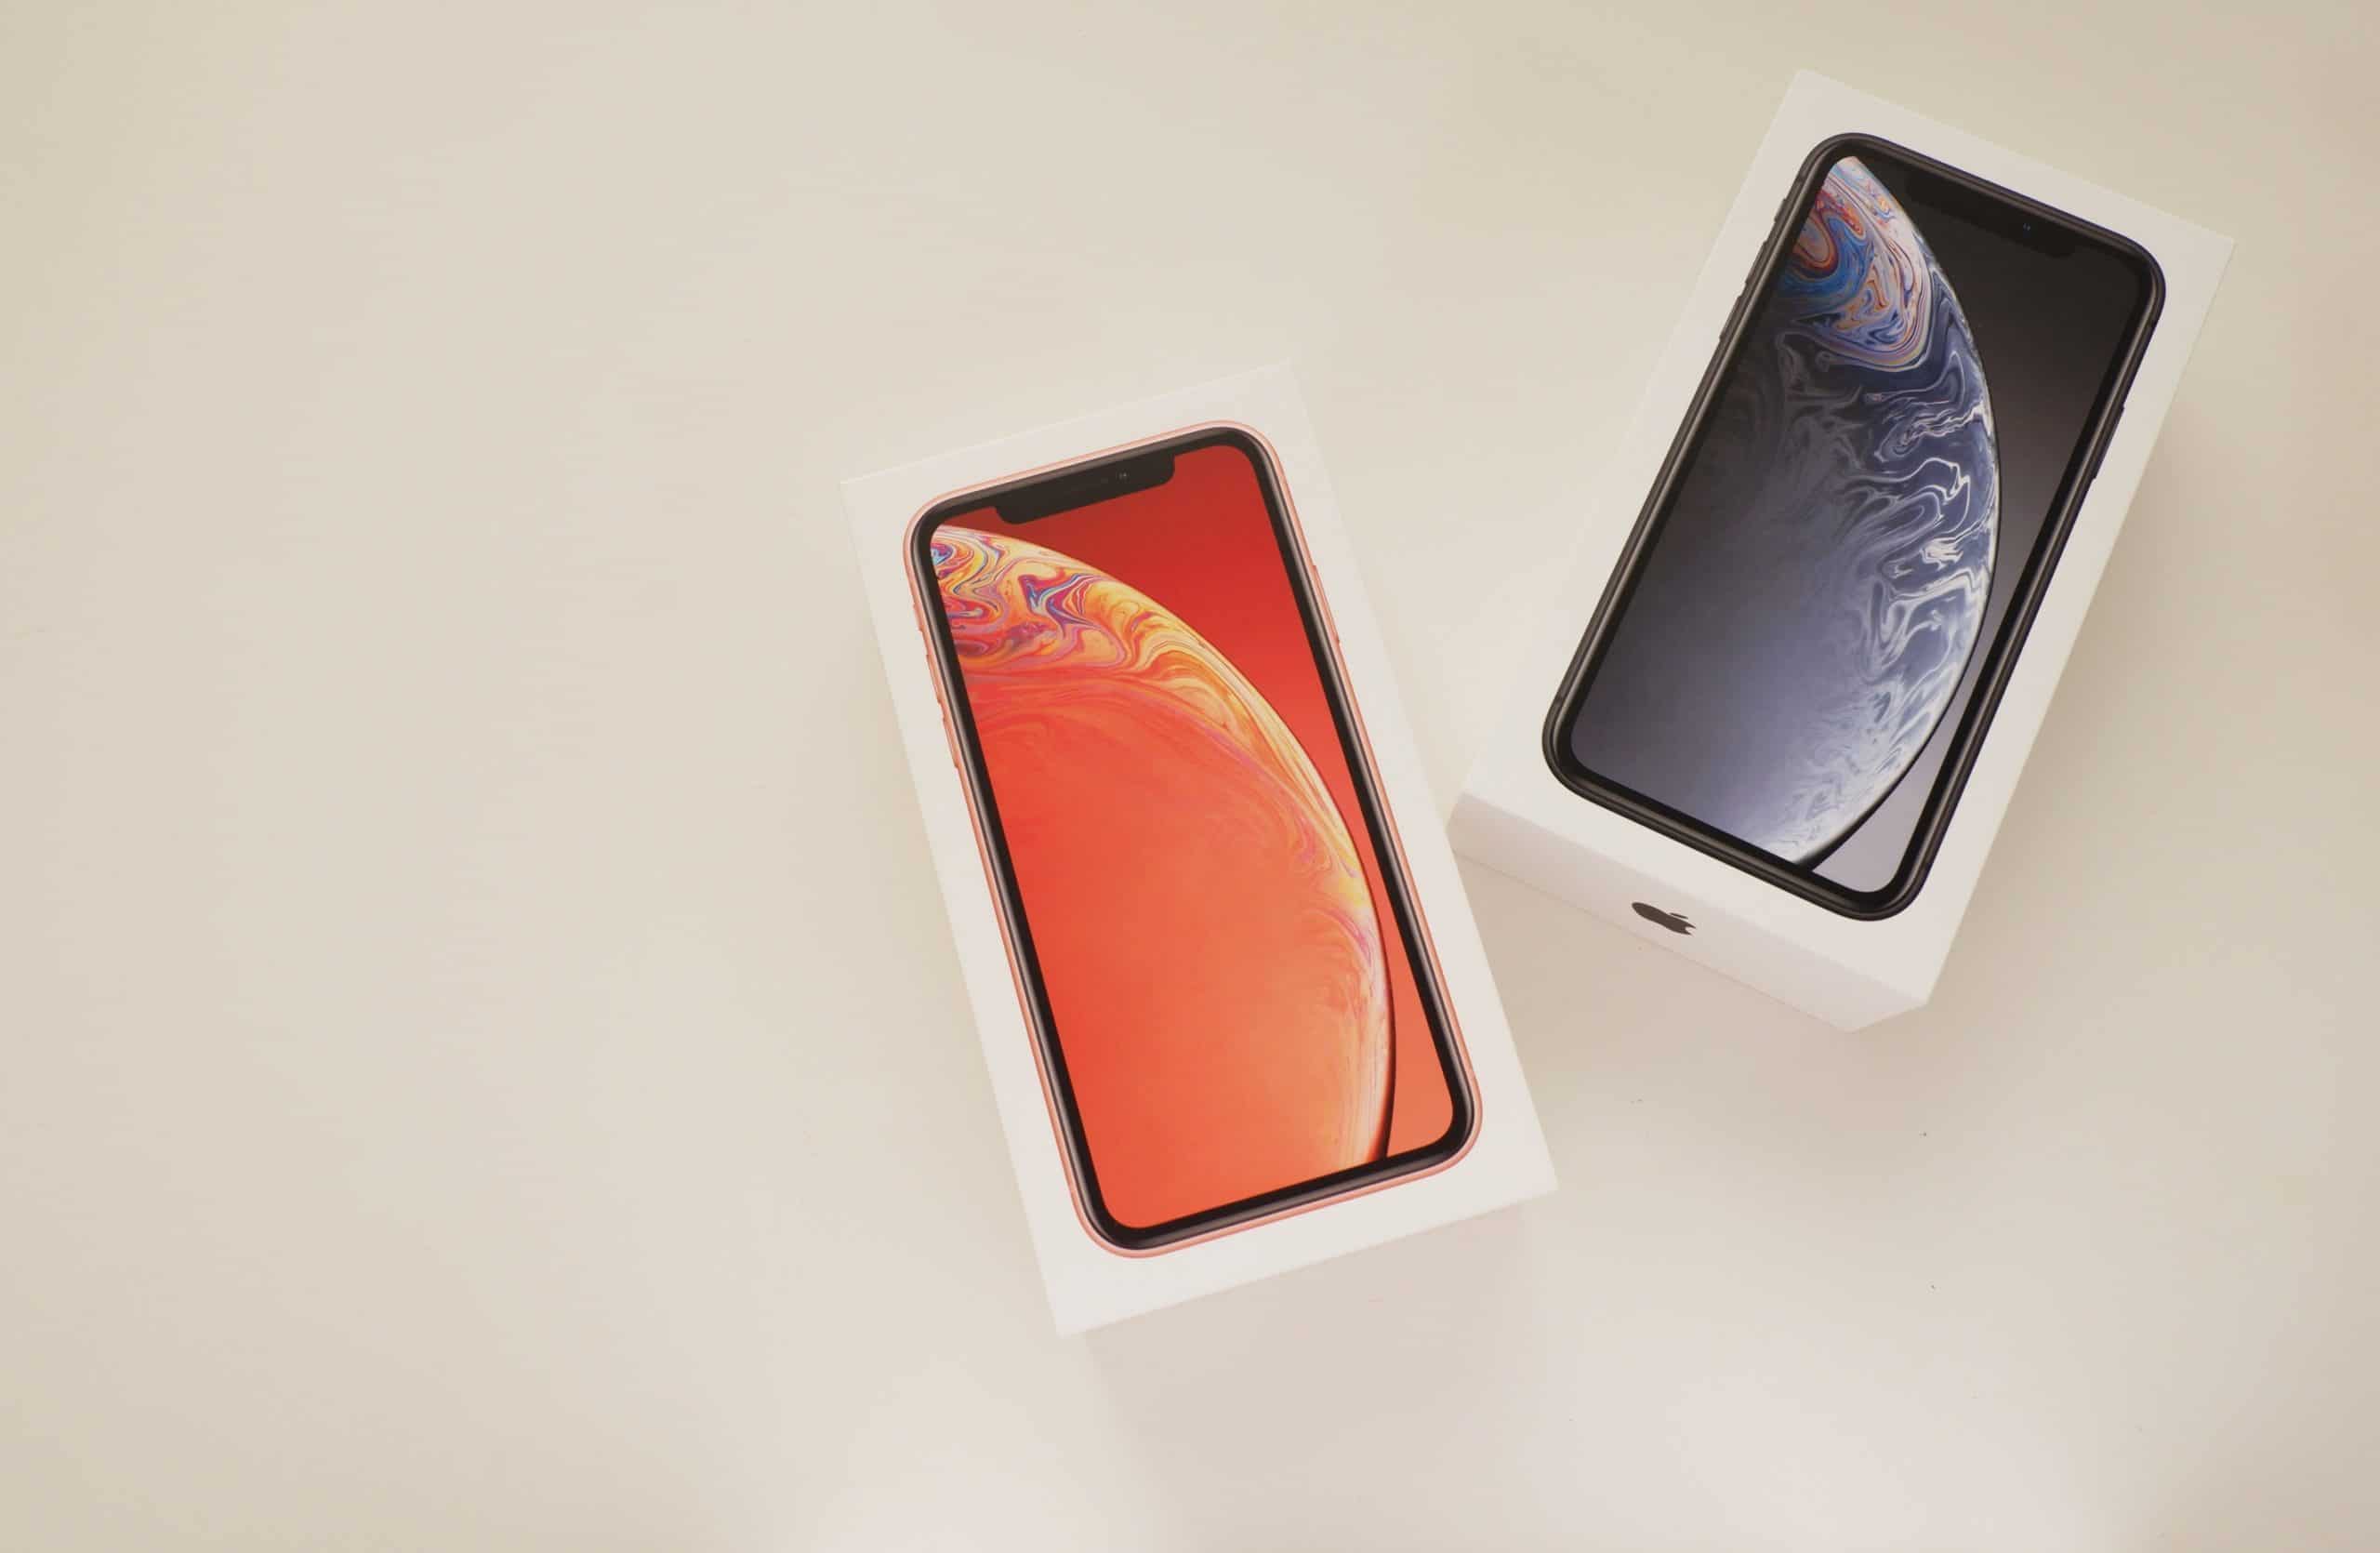 IPhone XR owners sue Apple over signal problems